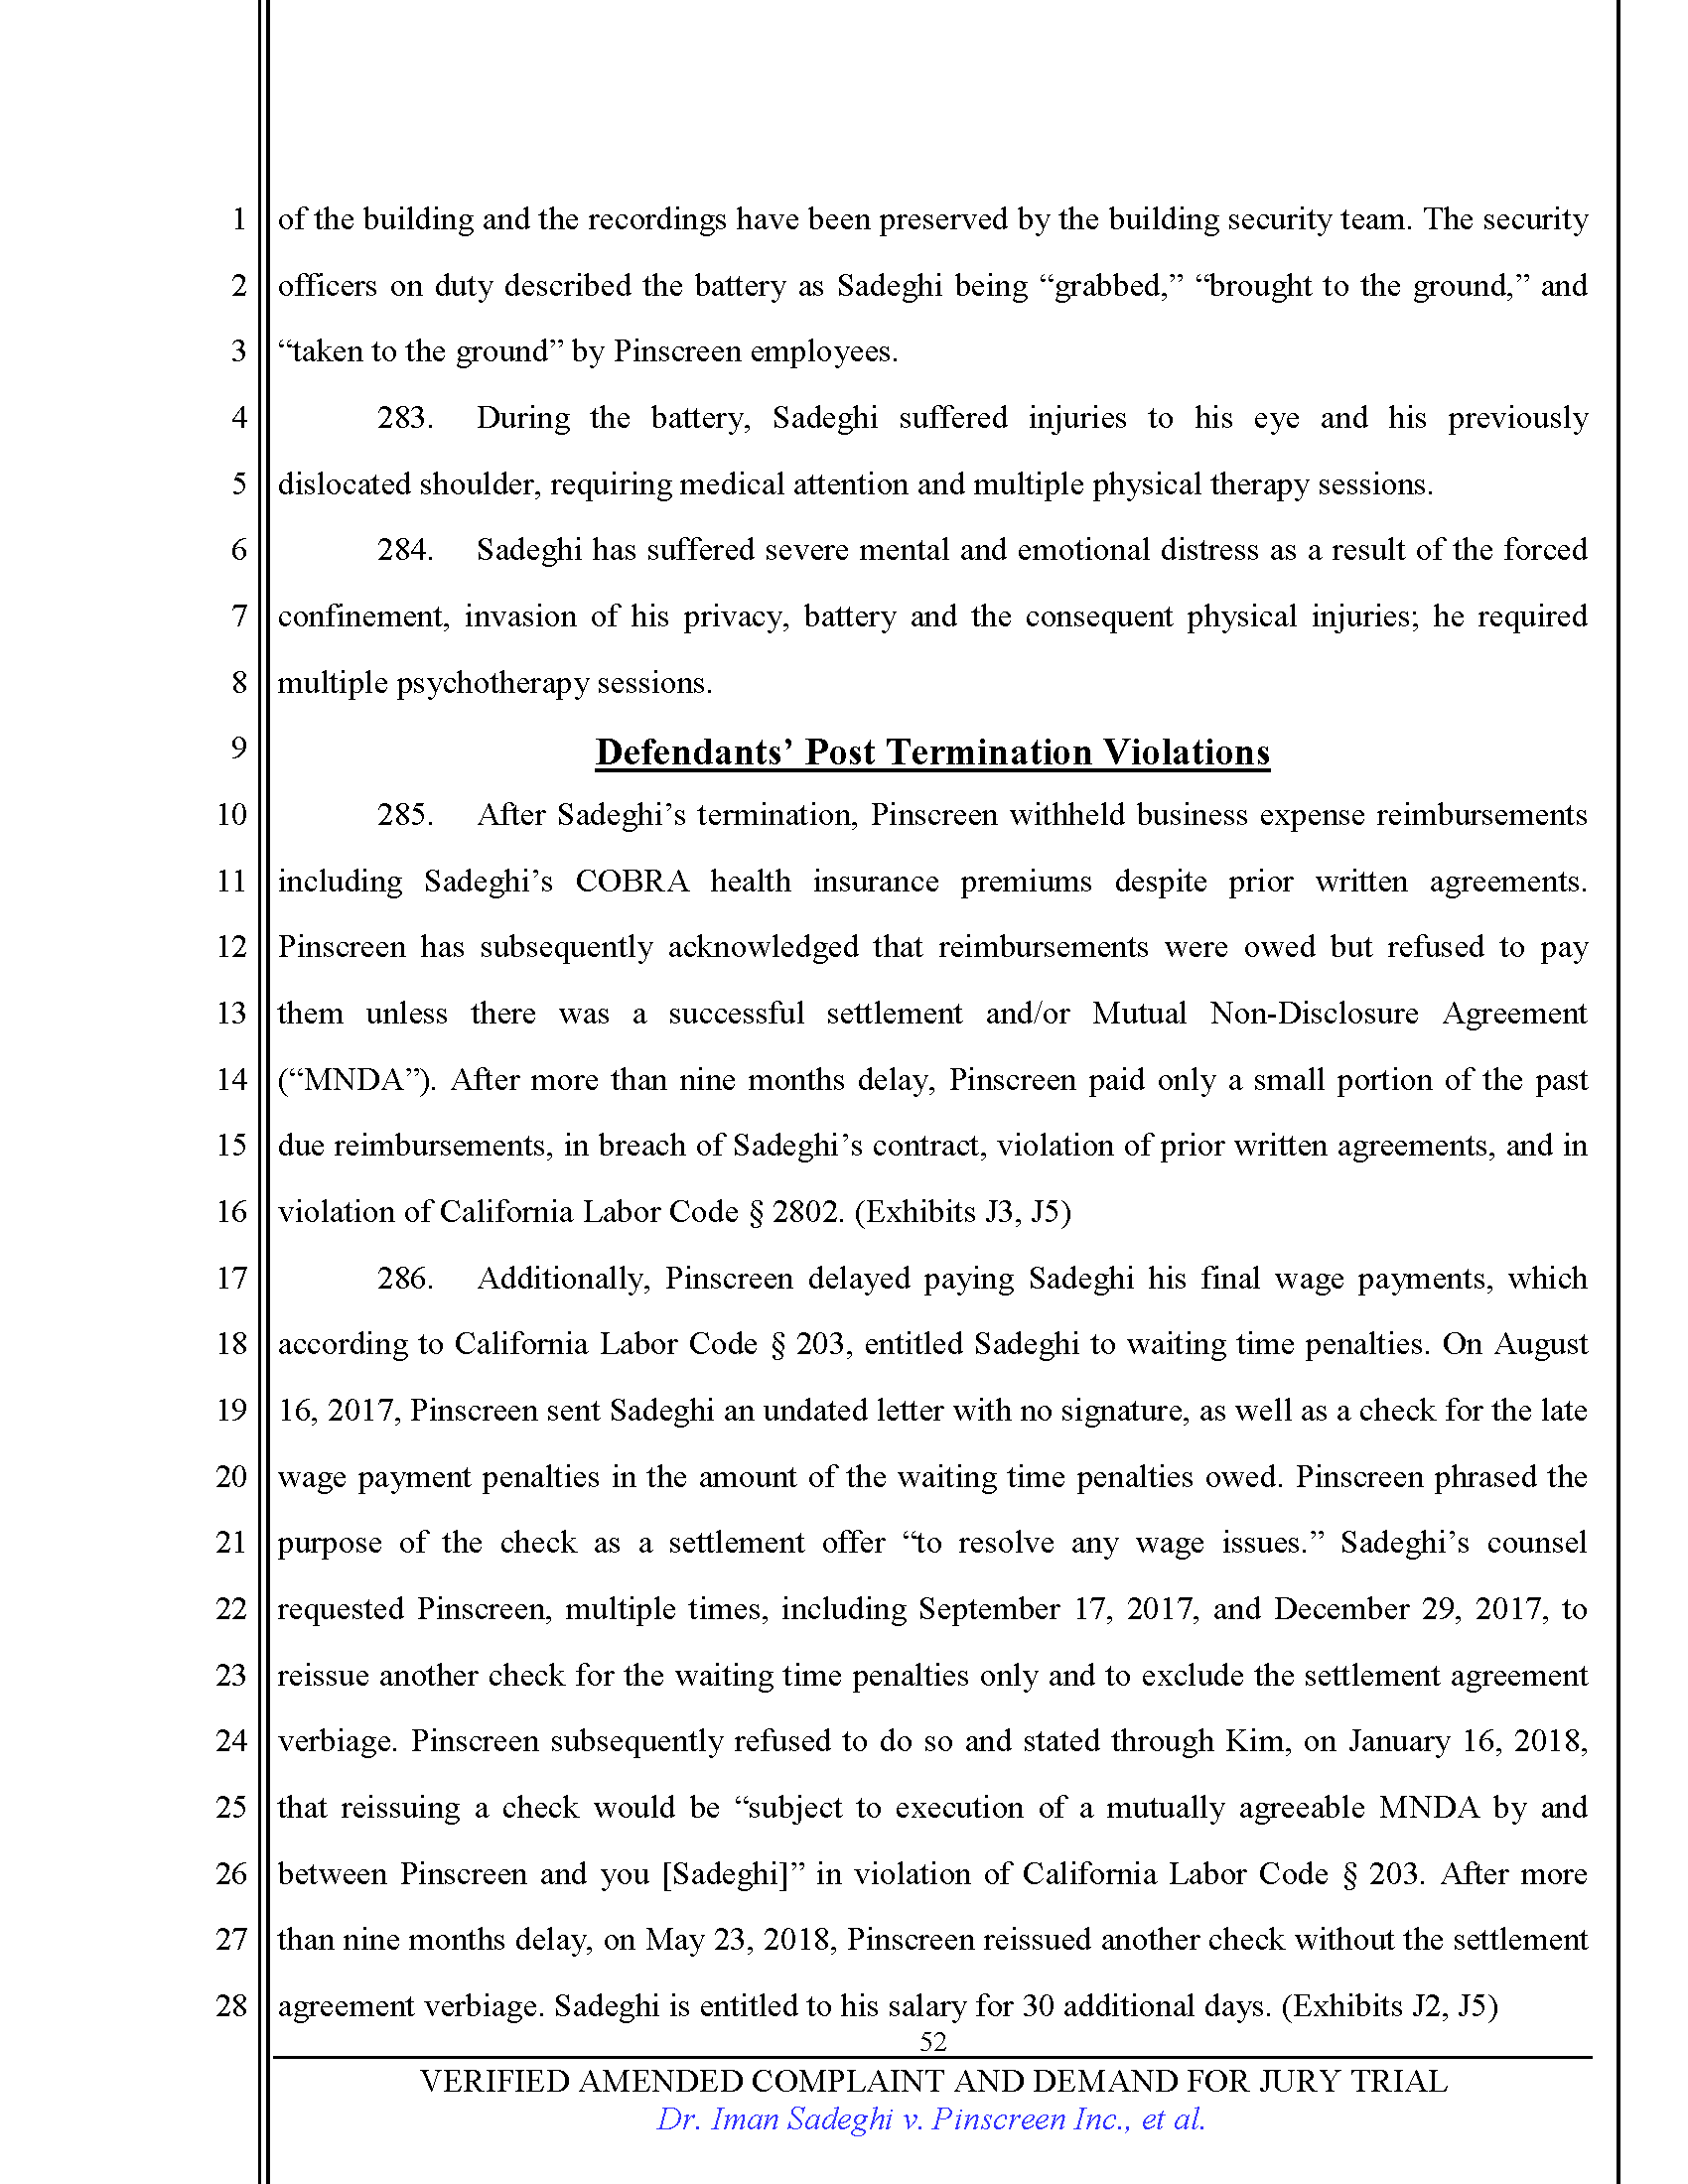 First Amended Complaint (FAC) Page 52